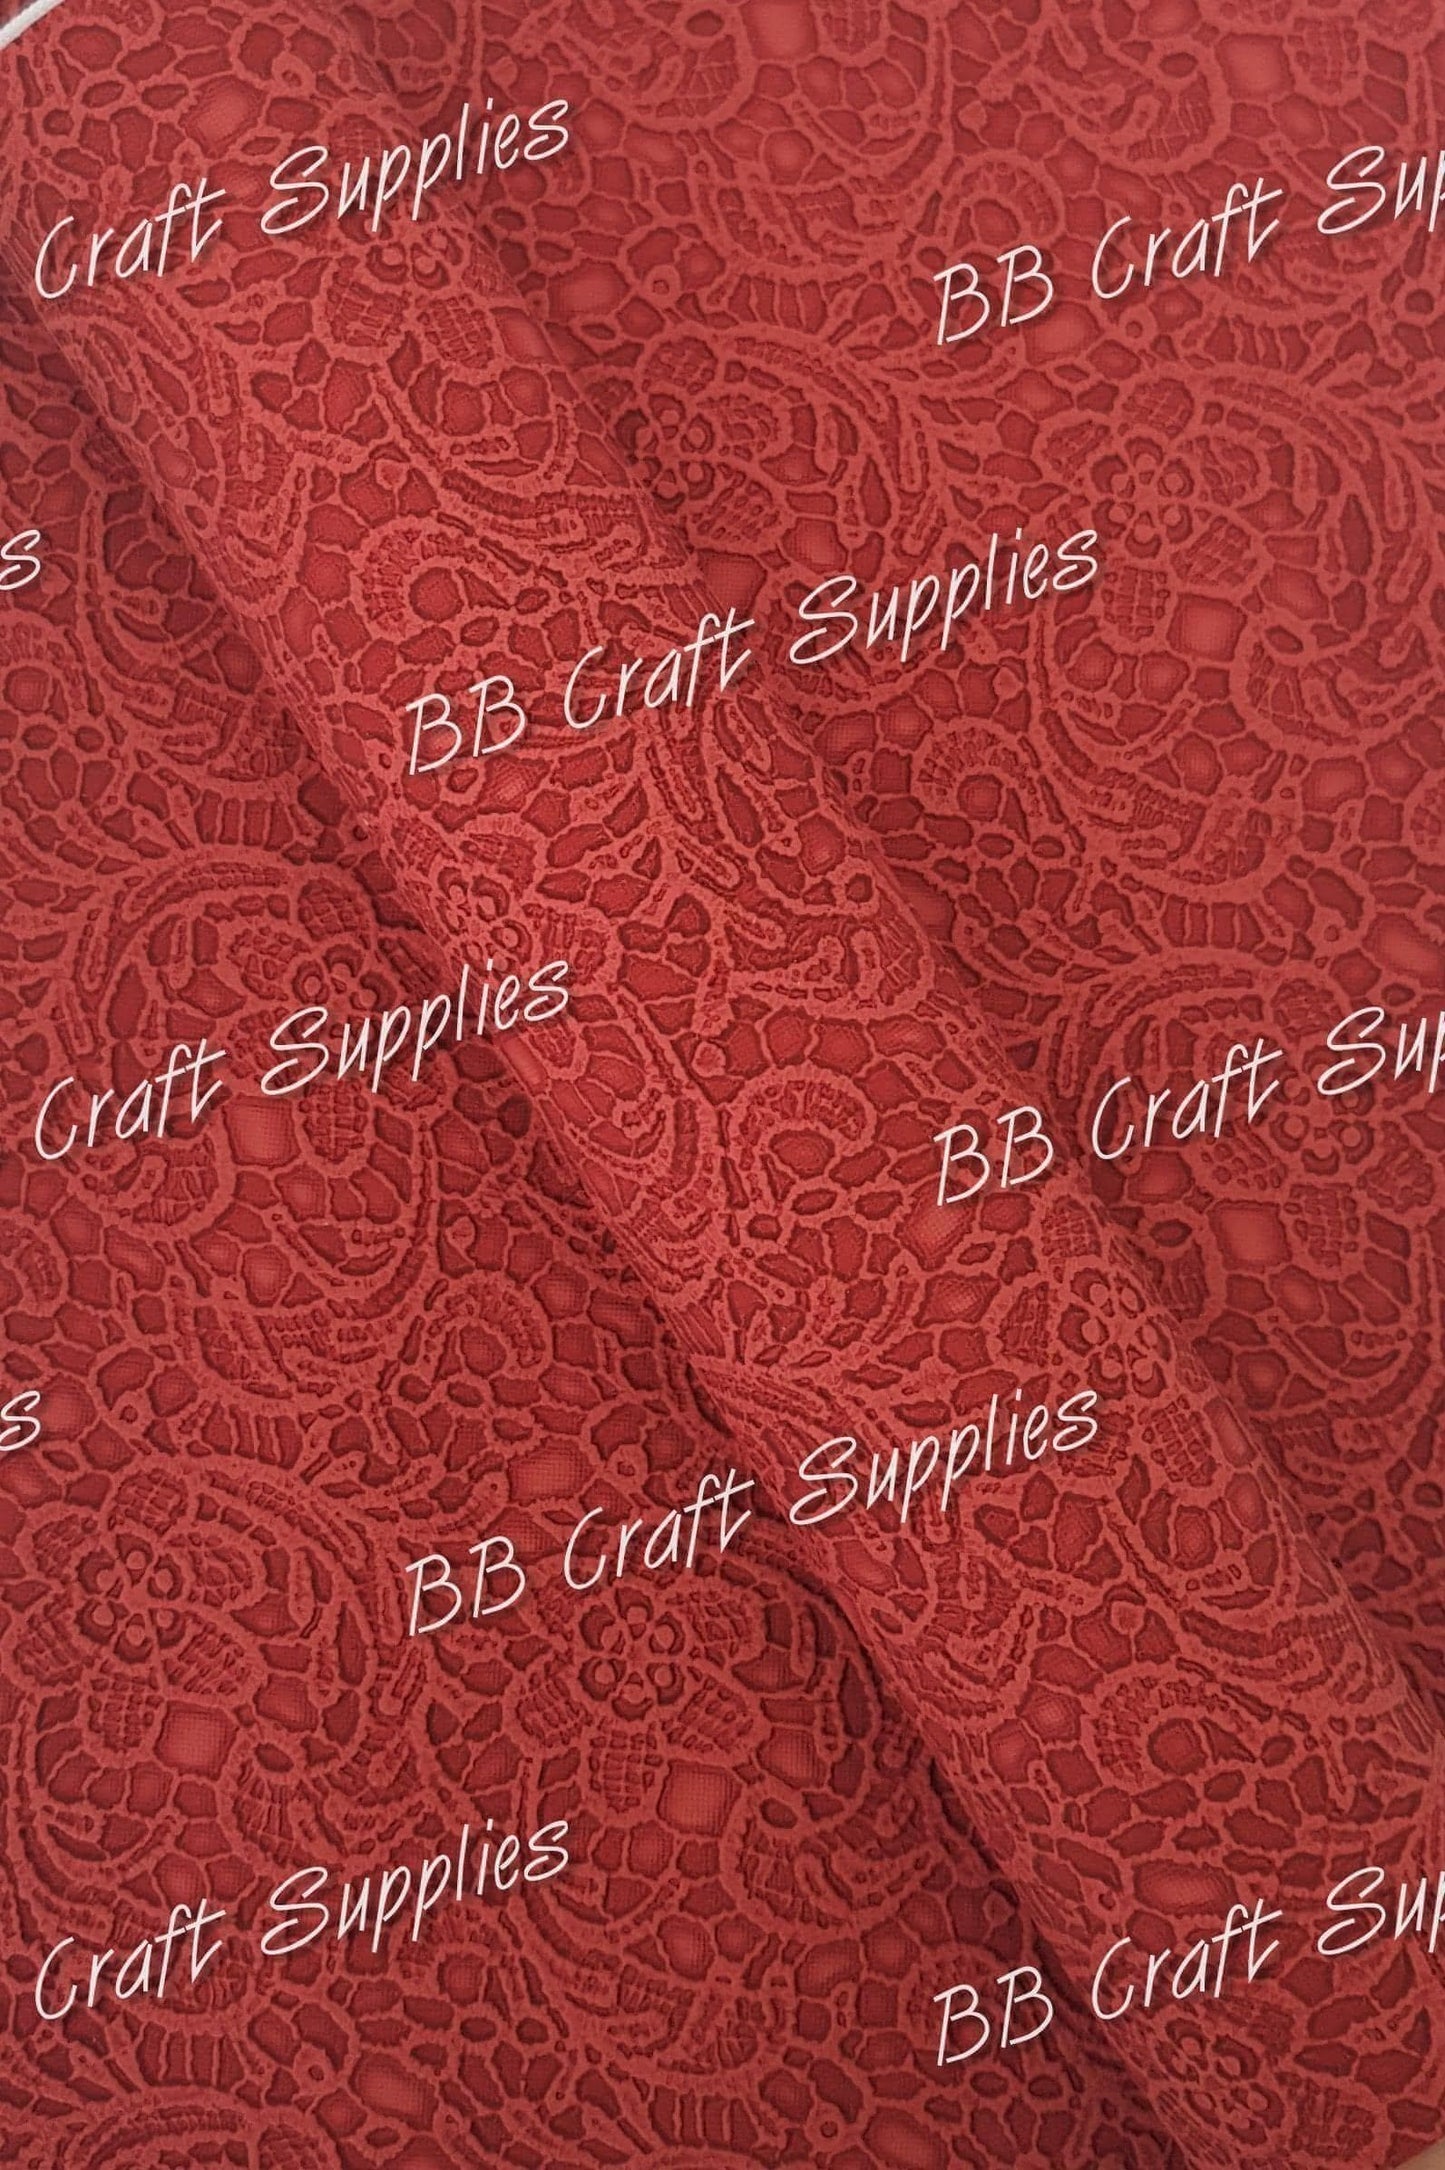 Roll - Butter Soft Embossed Lace Scarlet Red - butter, embossed, Faux, Faux Leather, Roll, soft - Bare Butler Faux Leather Supplies 